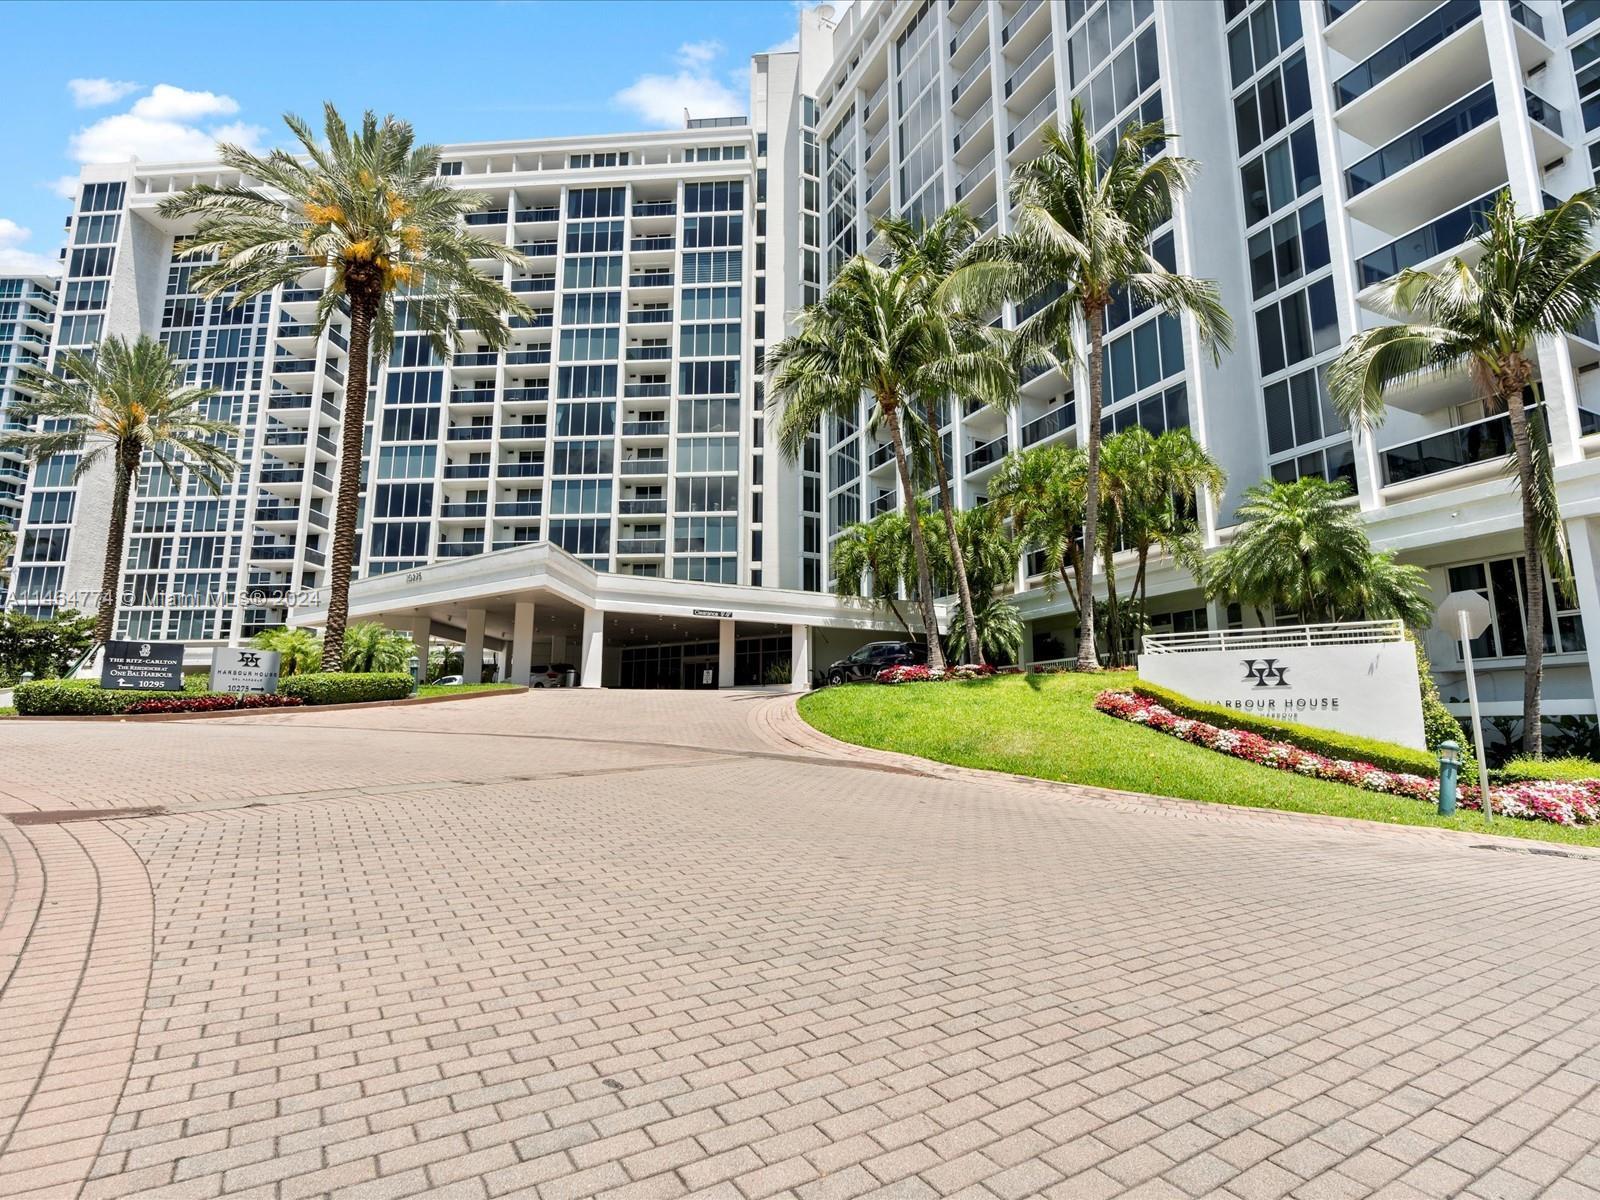 Photo of 10275 Collins Ave #529 in Bal Harbour, FL